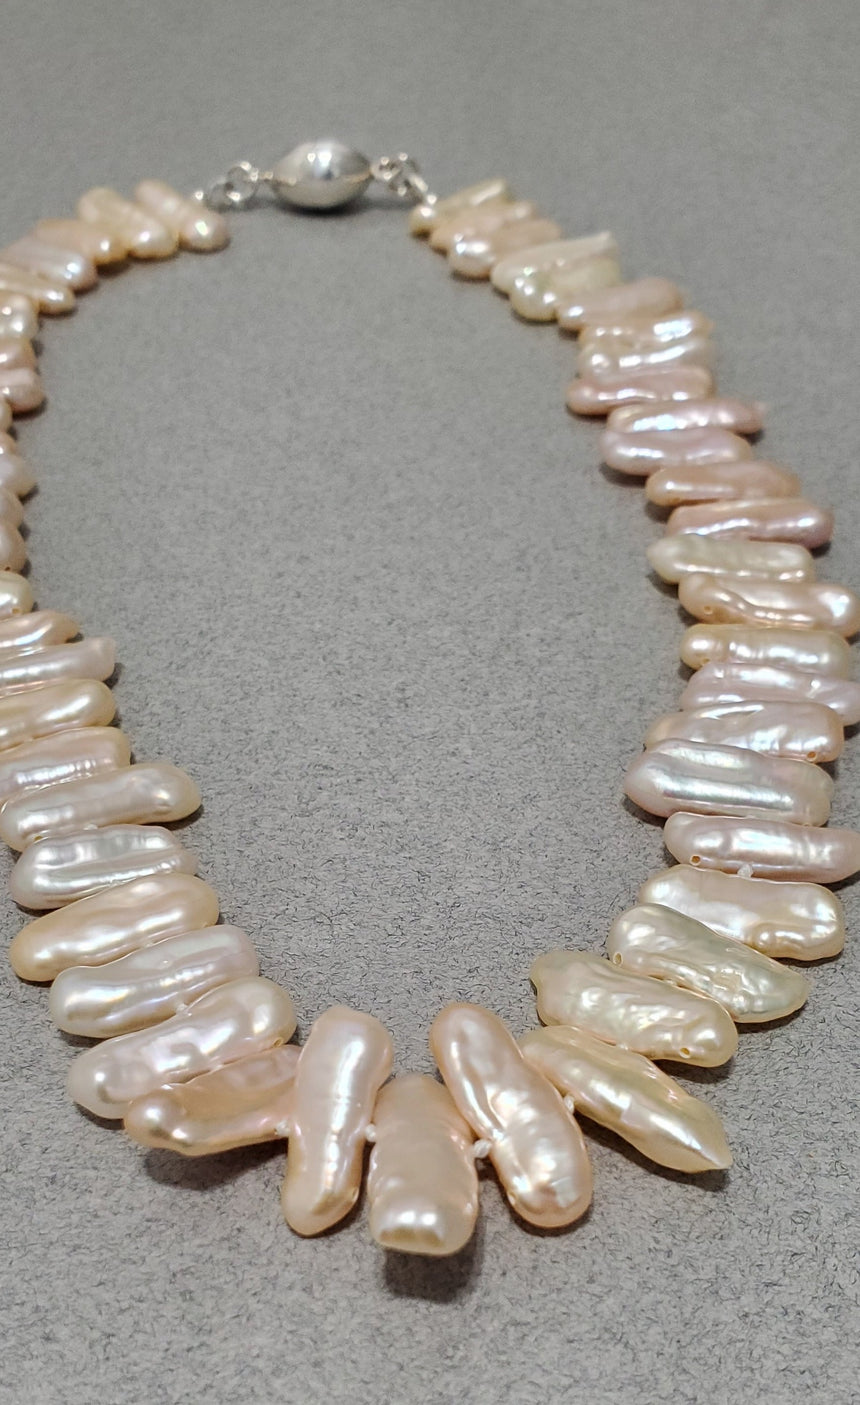 Peach Pillow Biwa Freshwater Pearl Necklace, Hand Knotted Natural Pearls, Wedding Pearl Necklace.